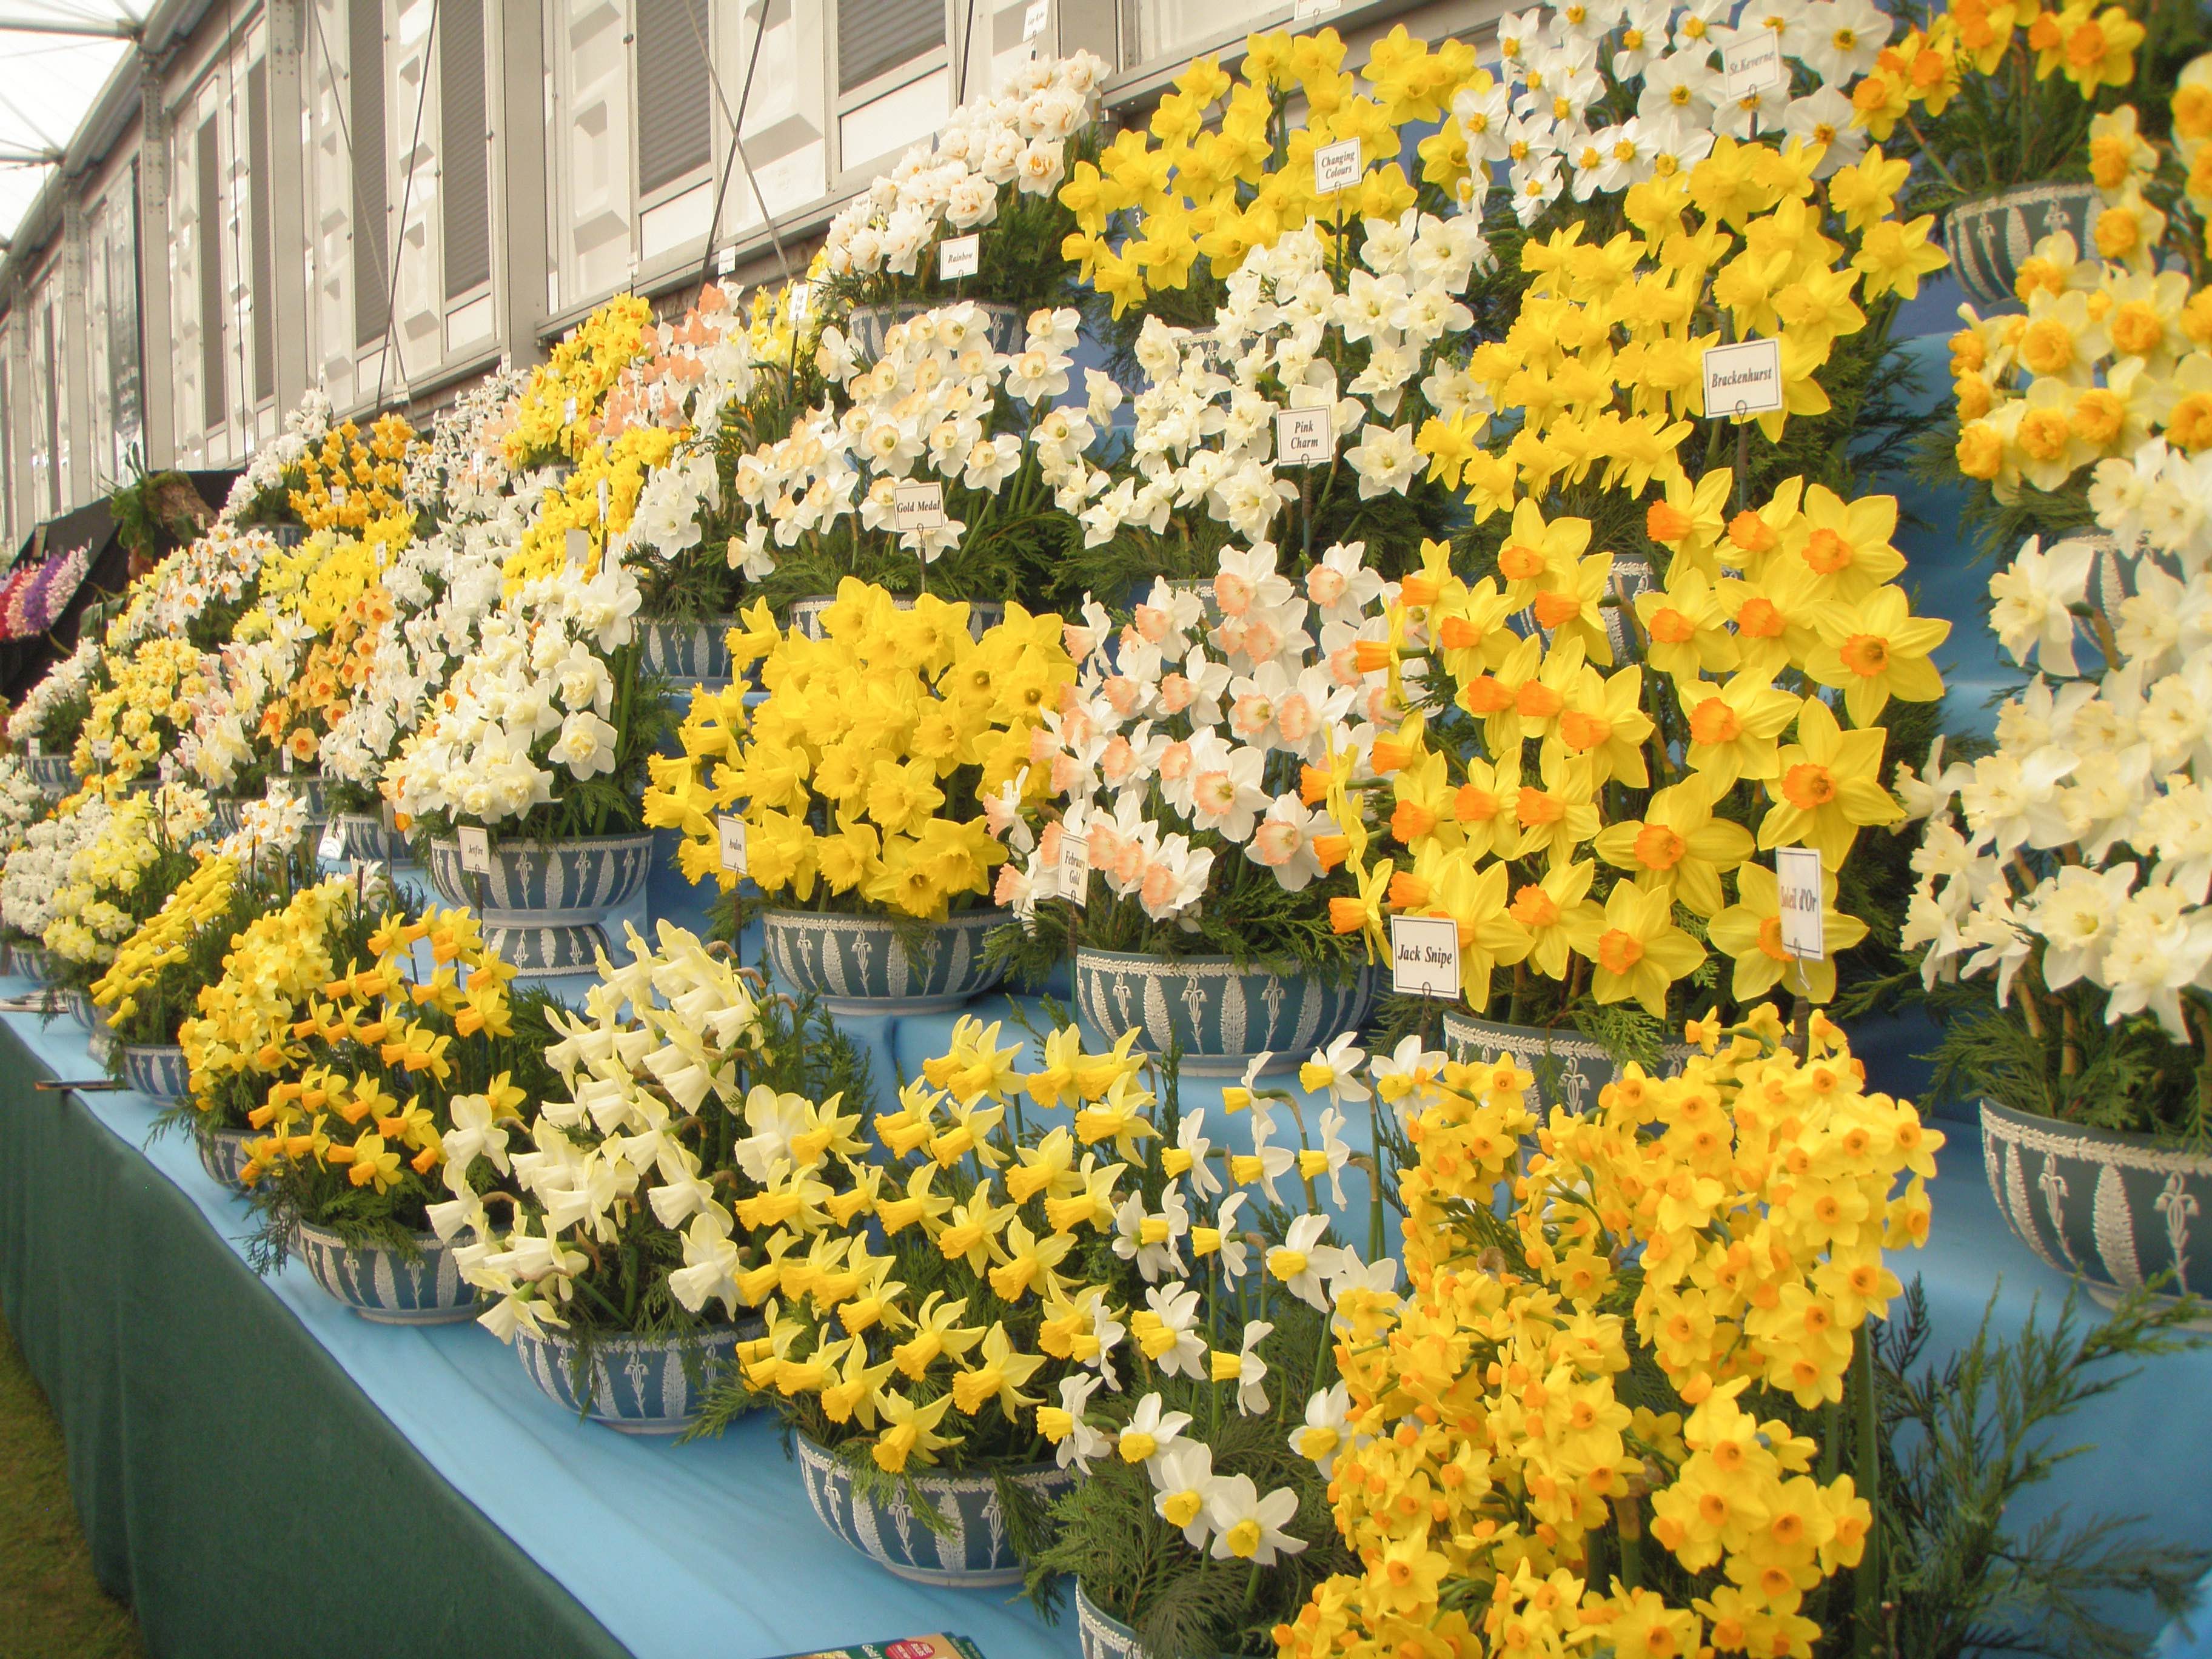 Narcissus at Chelsea Flower Show 2012 - Photo by Dawn Bazely